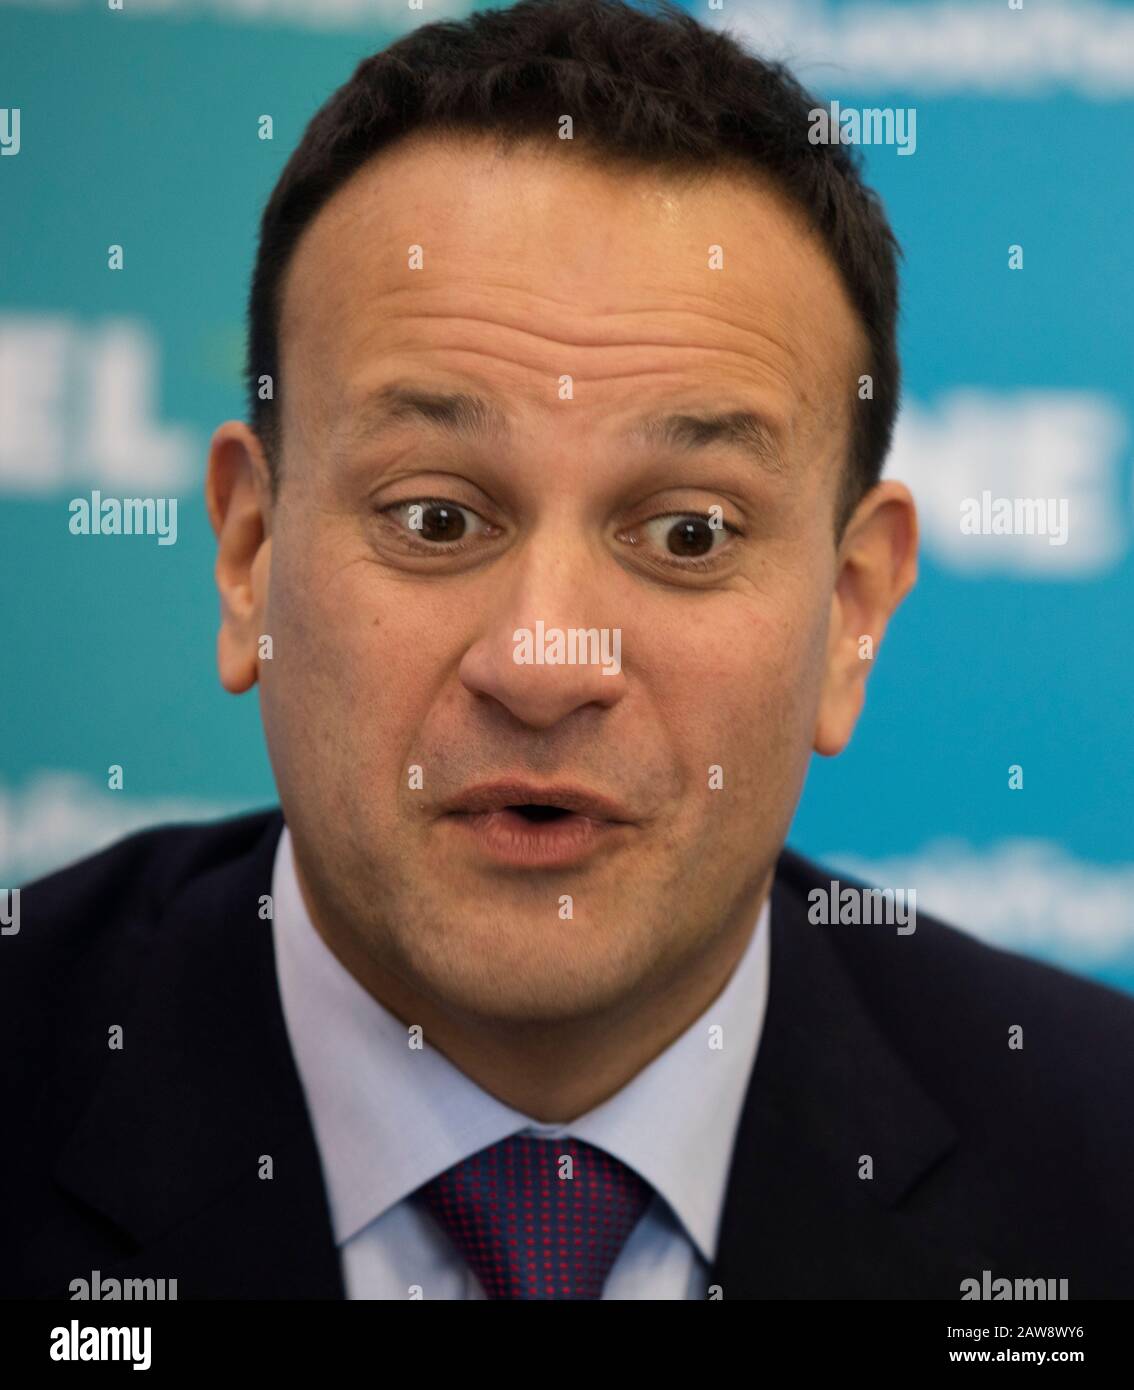 Carlow Town, Ireland. 6th Feb 2020. Irish General Election 2020. Taoiseach (Prime Minister) Leo Varadkar at the final main Fine Gael press conference of their General Election Campaign in the Institute of Technology, Carlow Town. Photo: Eamonn Farrell/RollingNews.ie/Alamy Live News Credit: RollingNews.ie/Alamy Live News Stock Photo